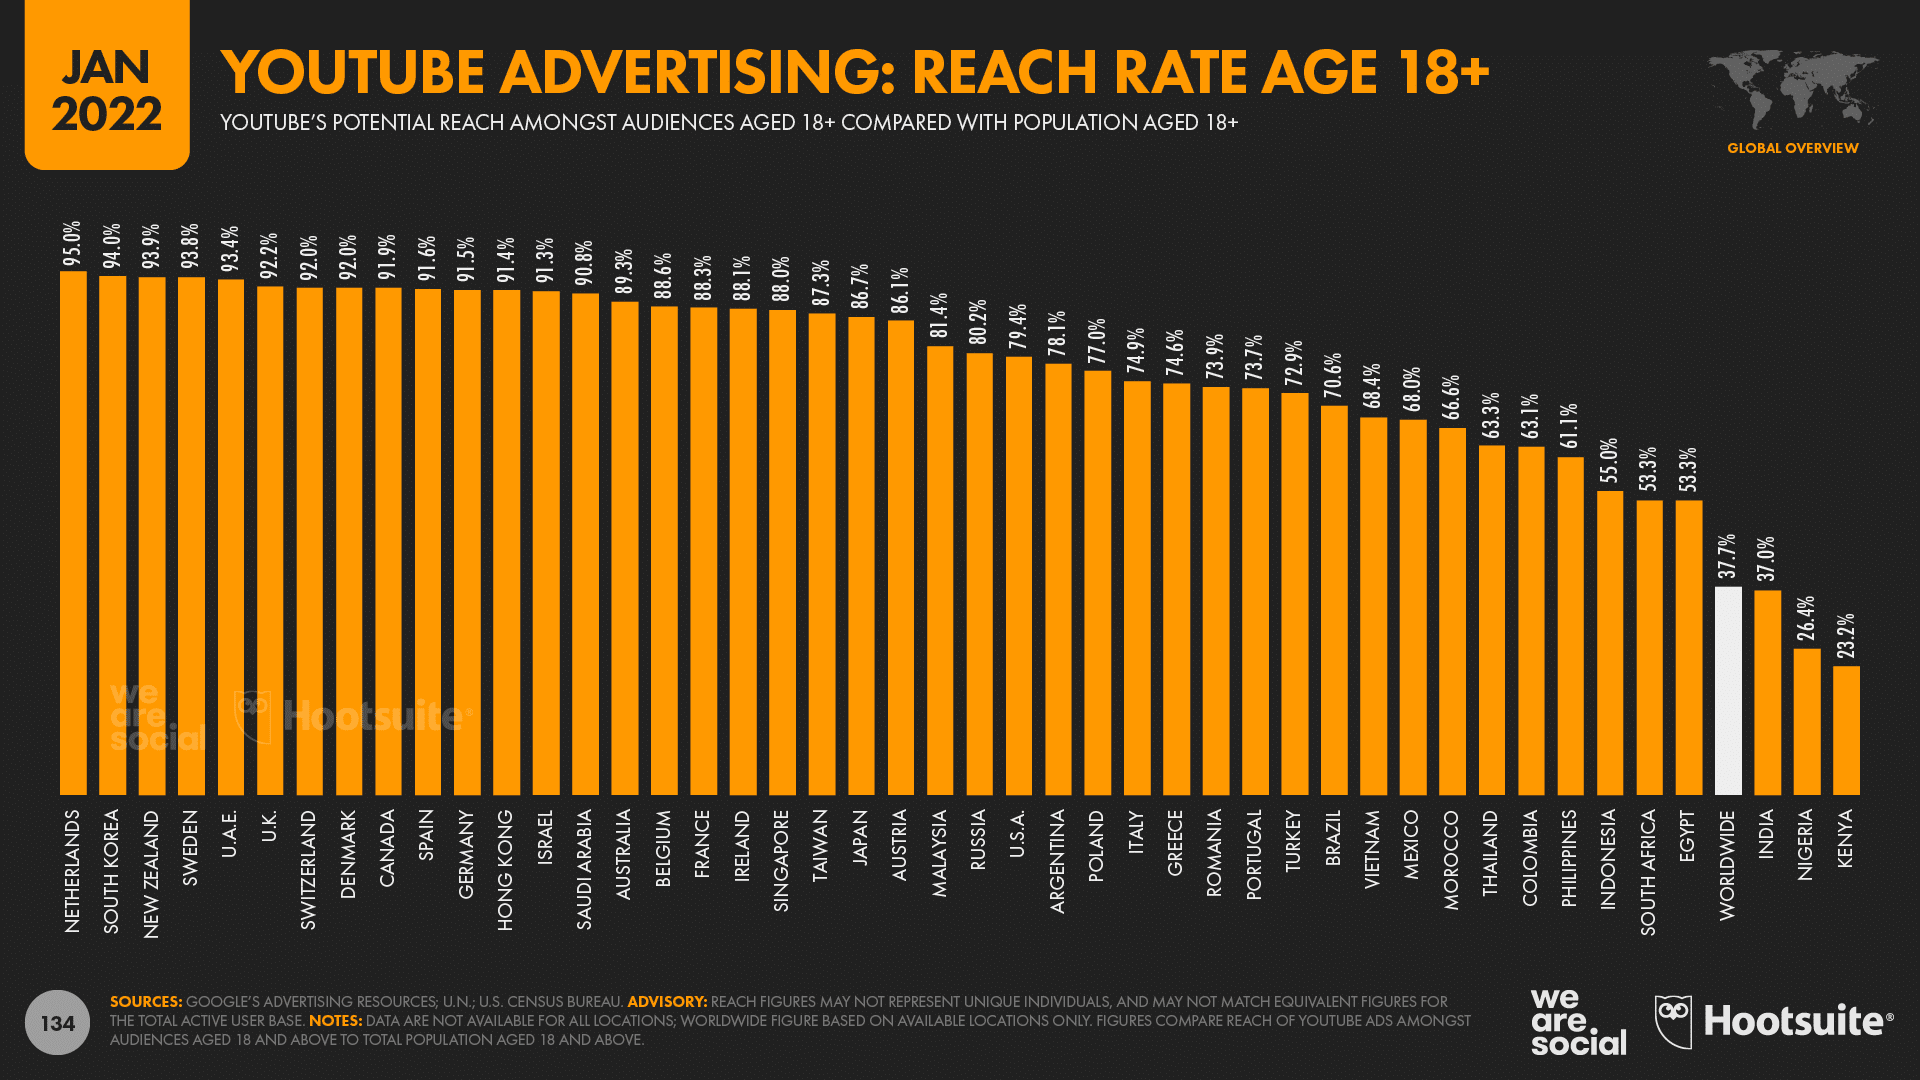 chart showing YouTube advertising reach rate age 18+